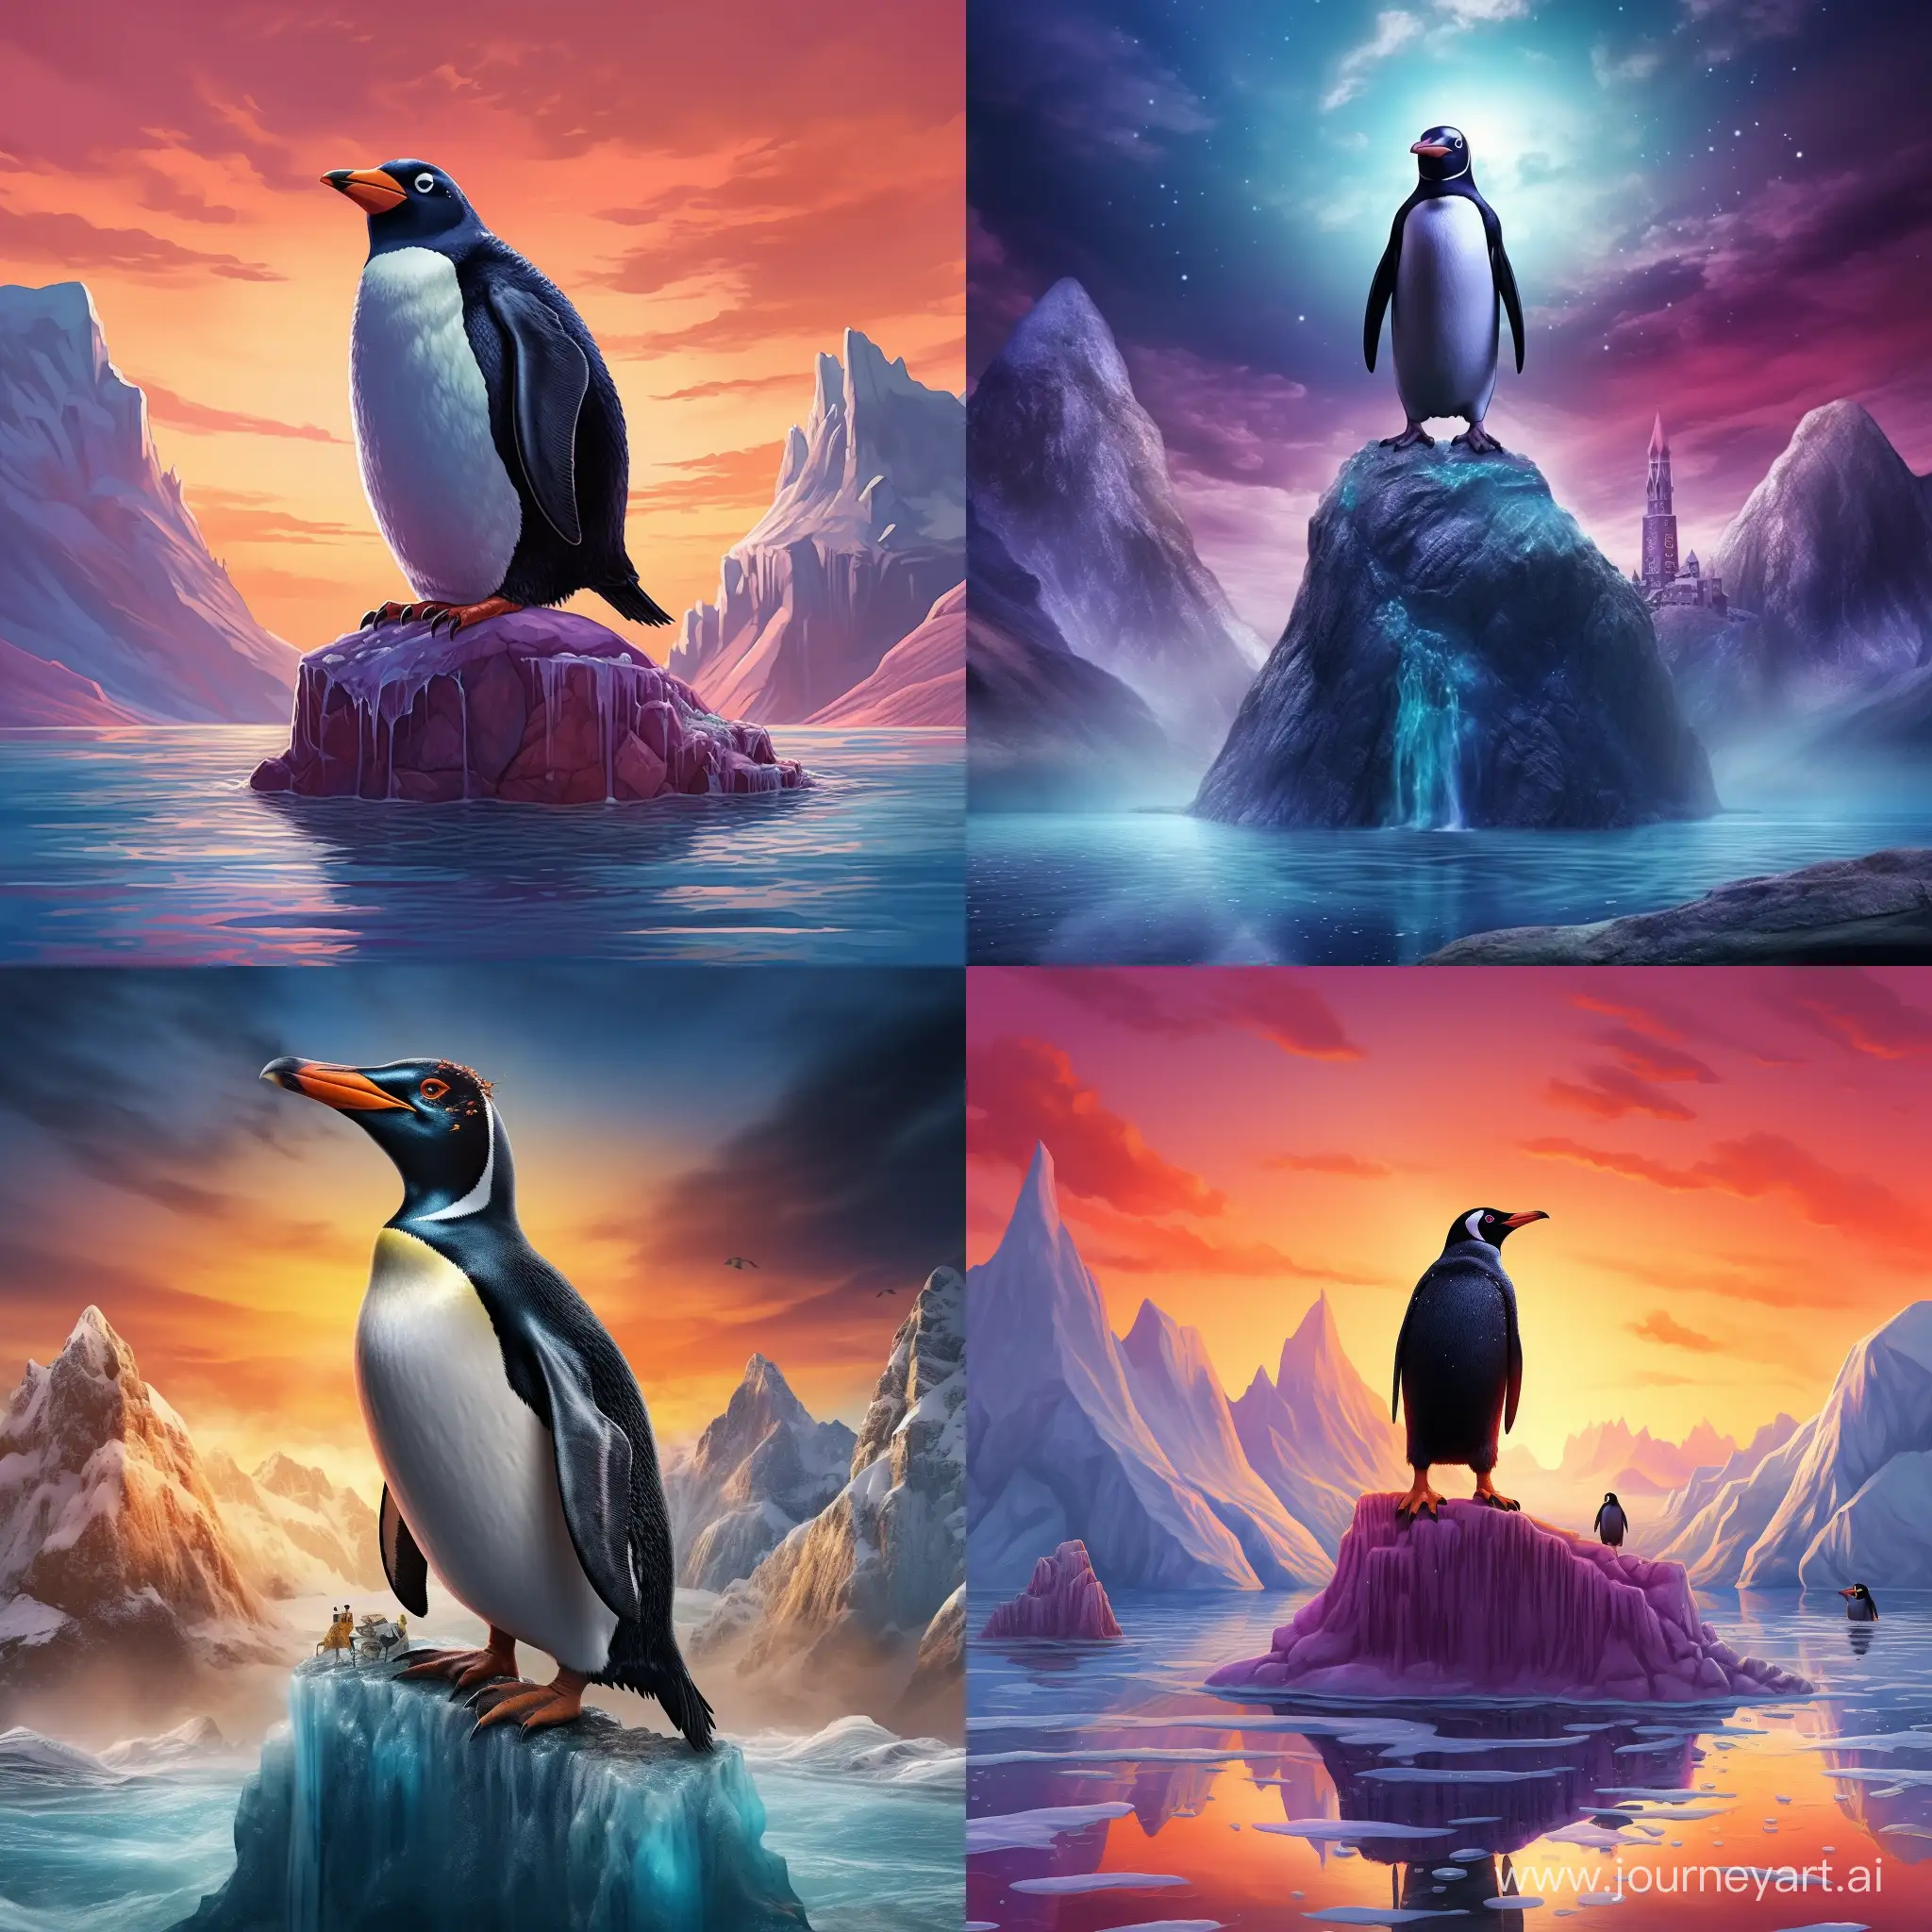 penguin stands atop iceberg. creepy mood. the penguin is saluting towards the camera. The penguin's face is replaced with harry potter's face. vivid color, ultra realistic